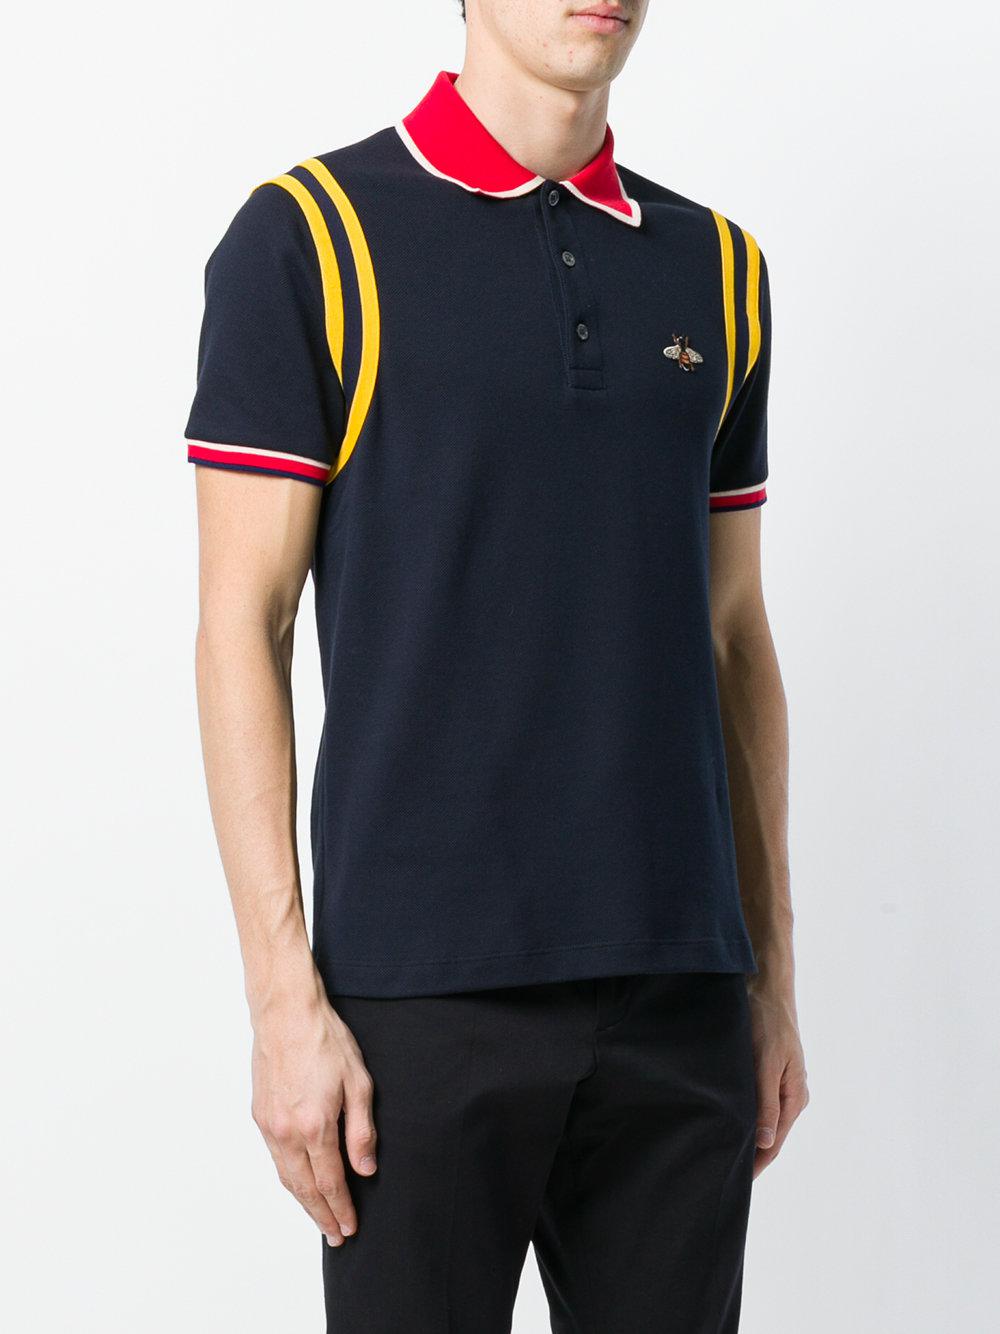 Gucci Cotton Bee Patch Polo Shirt in Blue for Men - Lyst